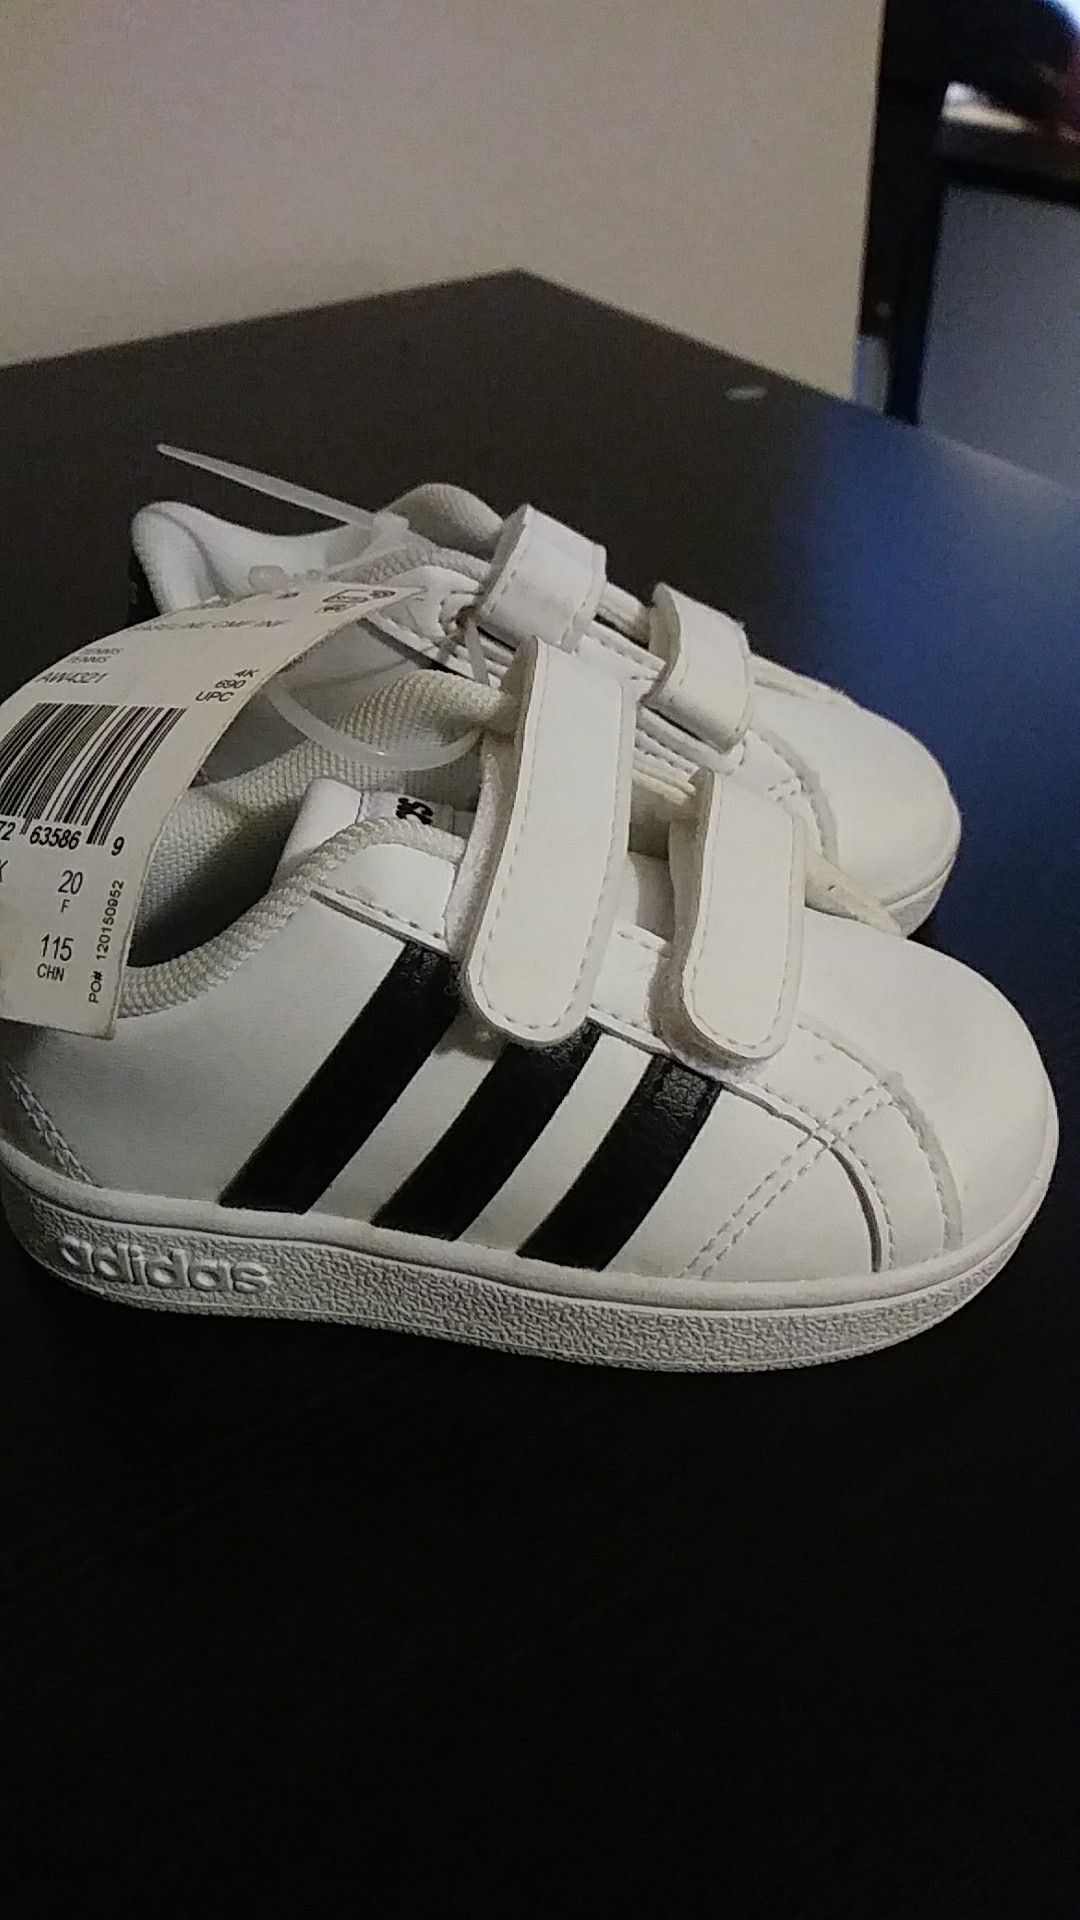 Adidas brand new with tags